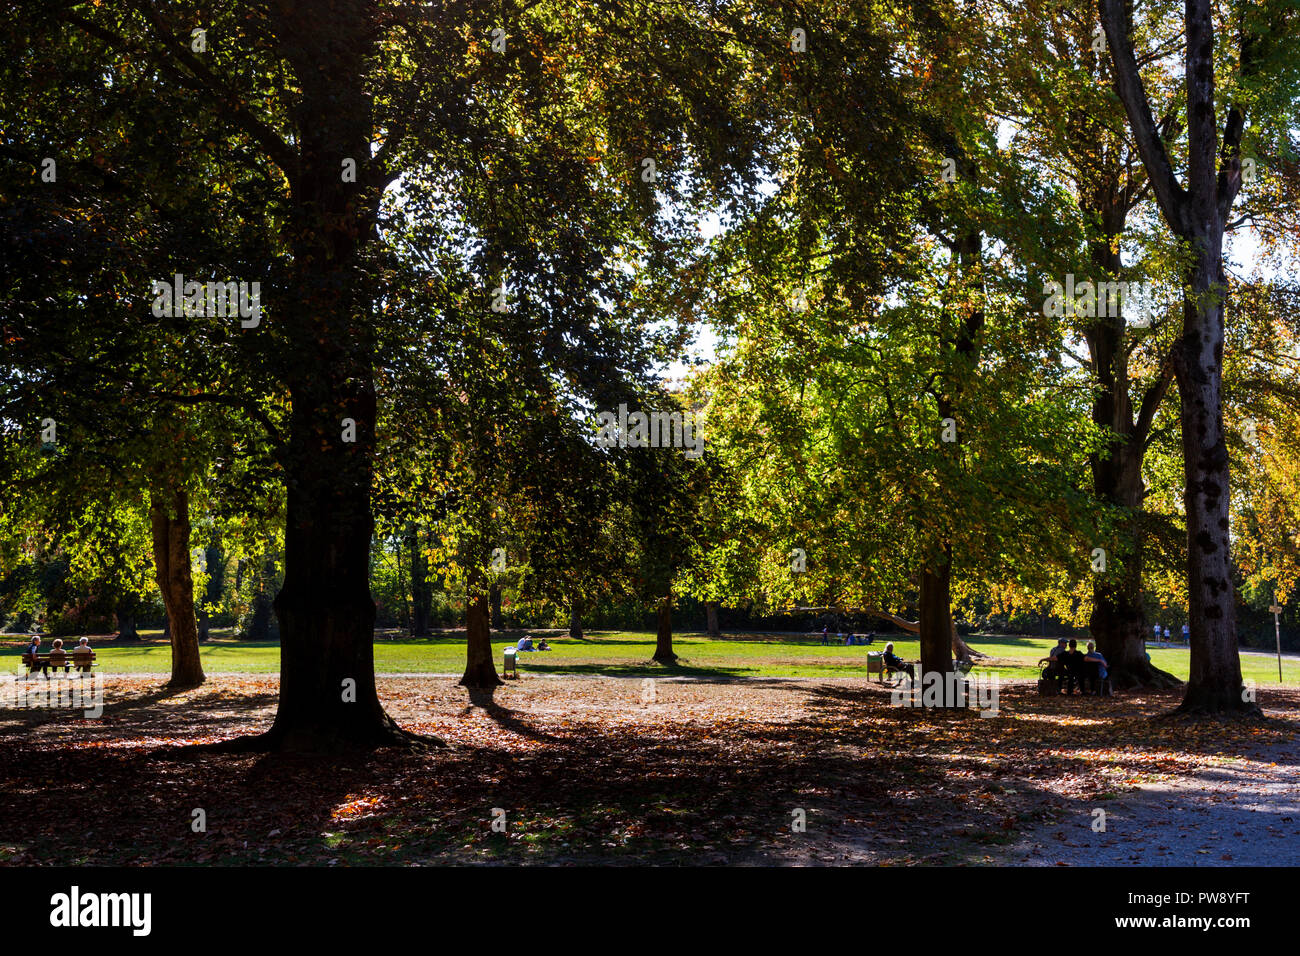 Mülheim an der Ruhr, Germany. 13 October 2018. People enjoy an autumnal heat wave in Witthausbusch Park. The unseasonal warm and sunny October weather is expected to last for several more days. Photo: North51/Alamy Live News Stock Photo